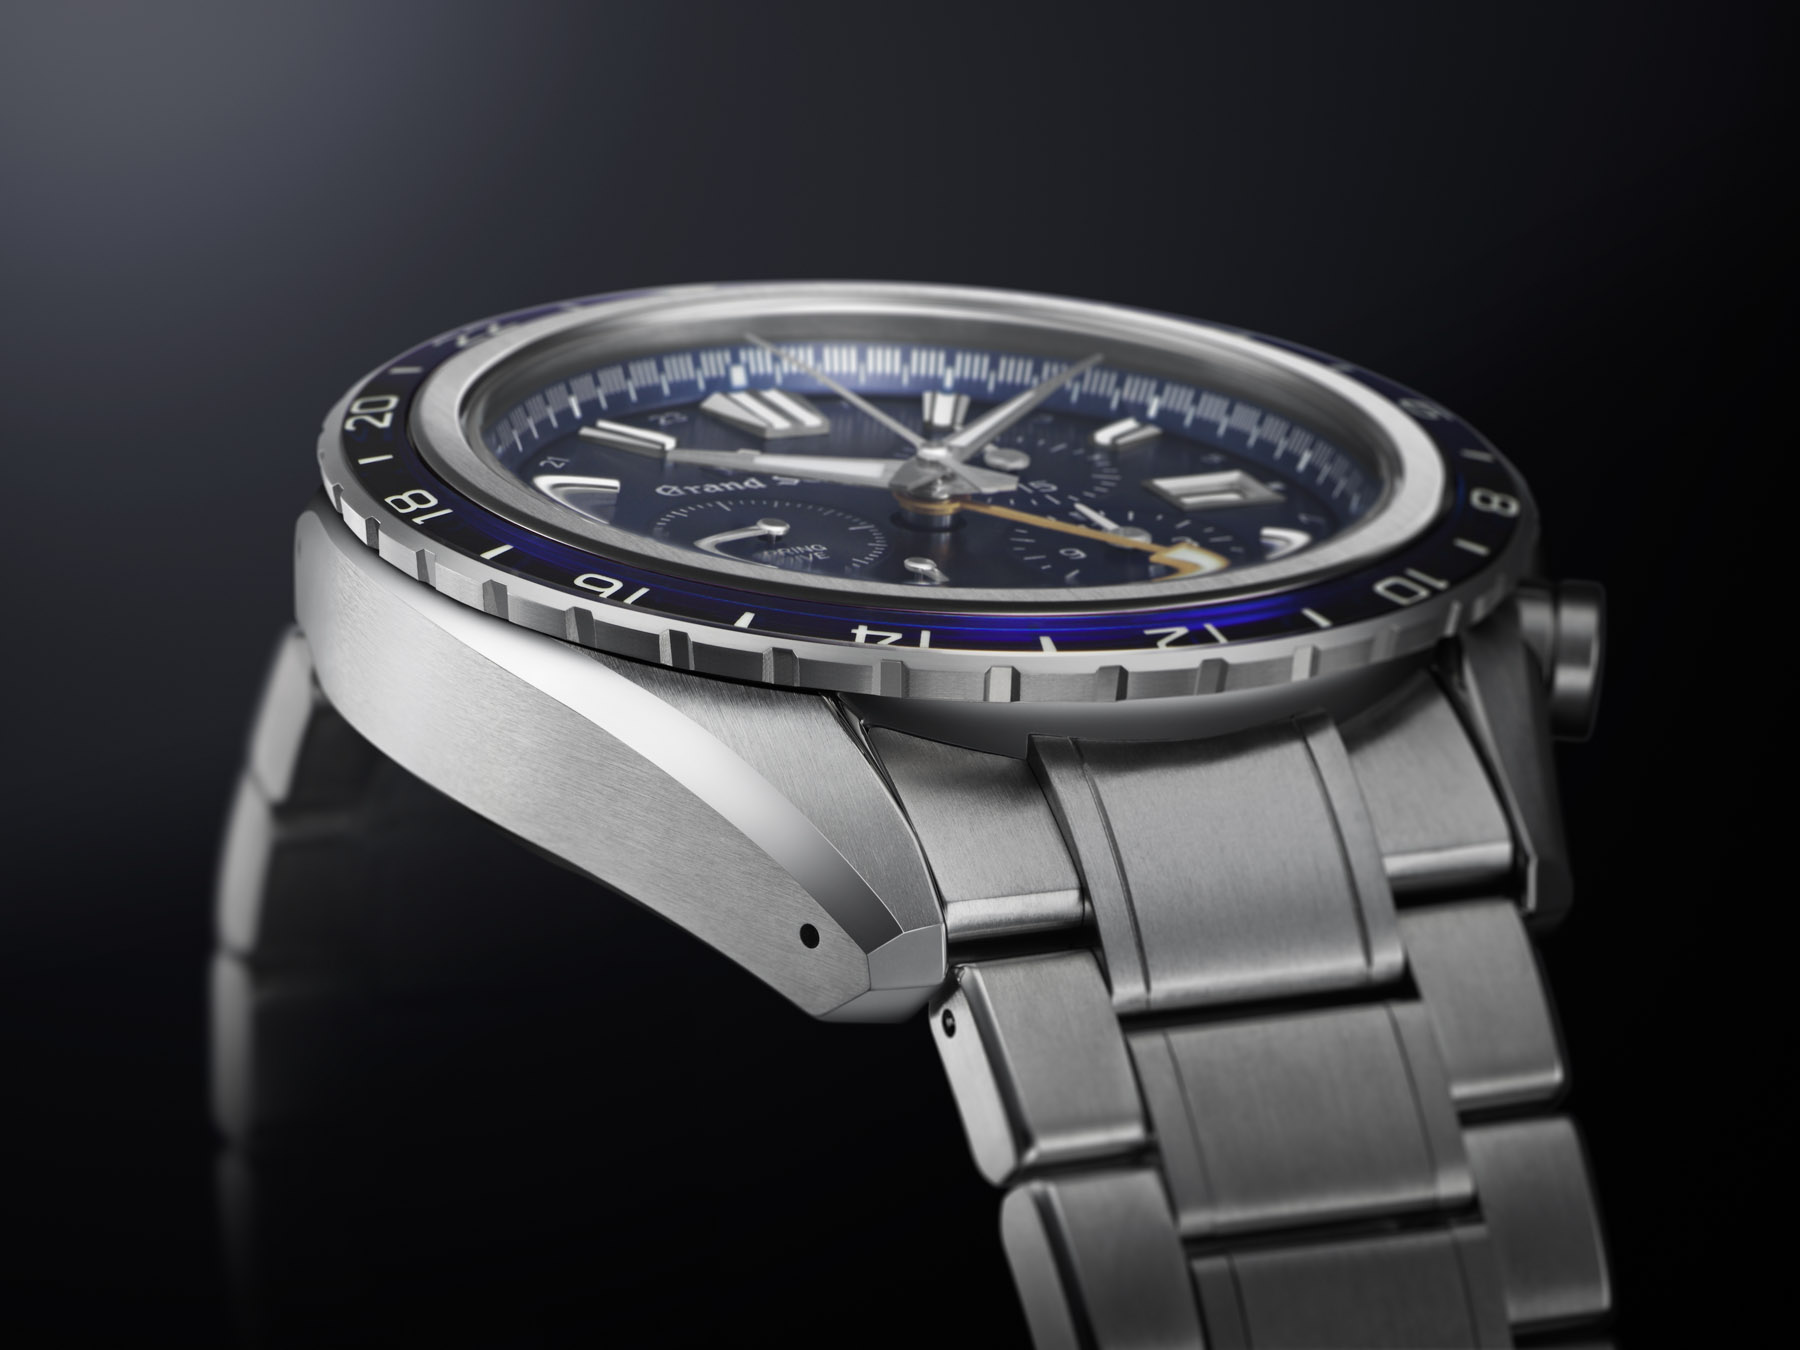 Grand Seiko Adds 3 Sport Watches To Evolution 9 Collection | aBlogtoWatch